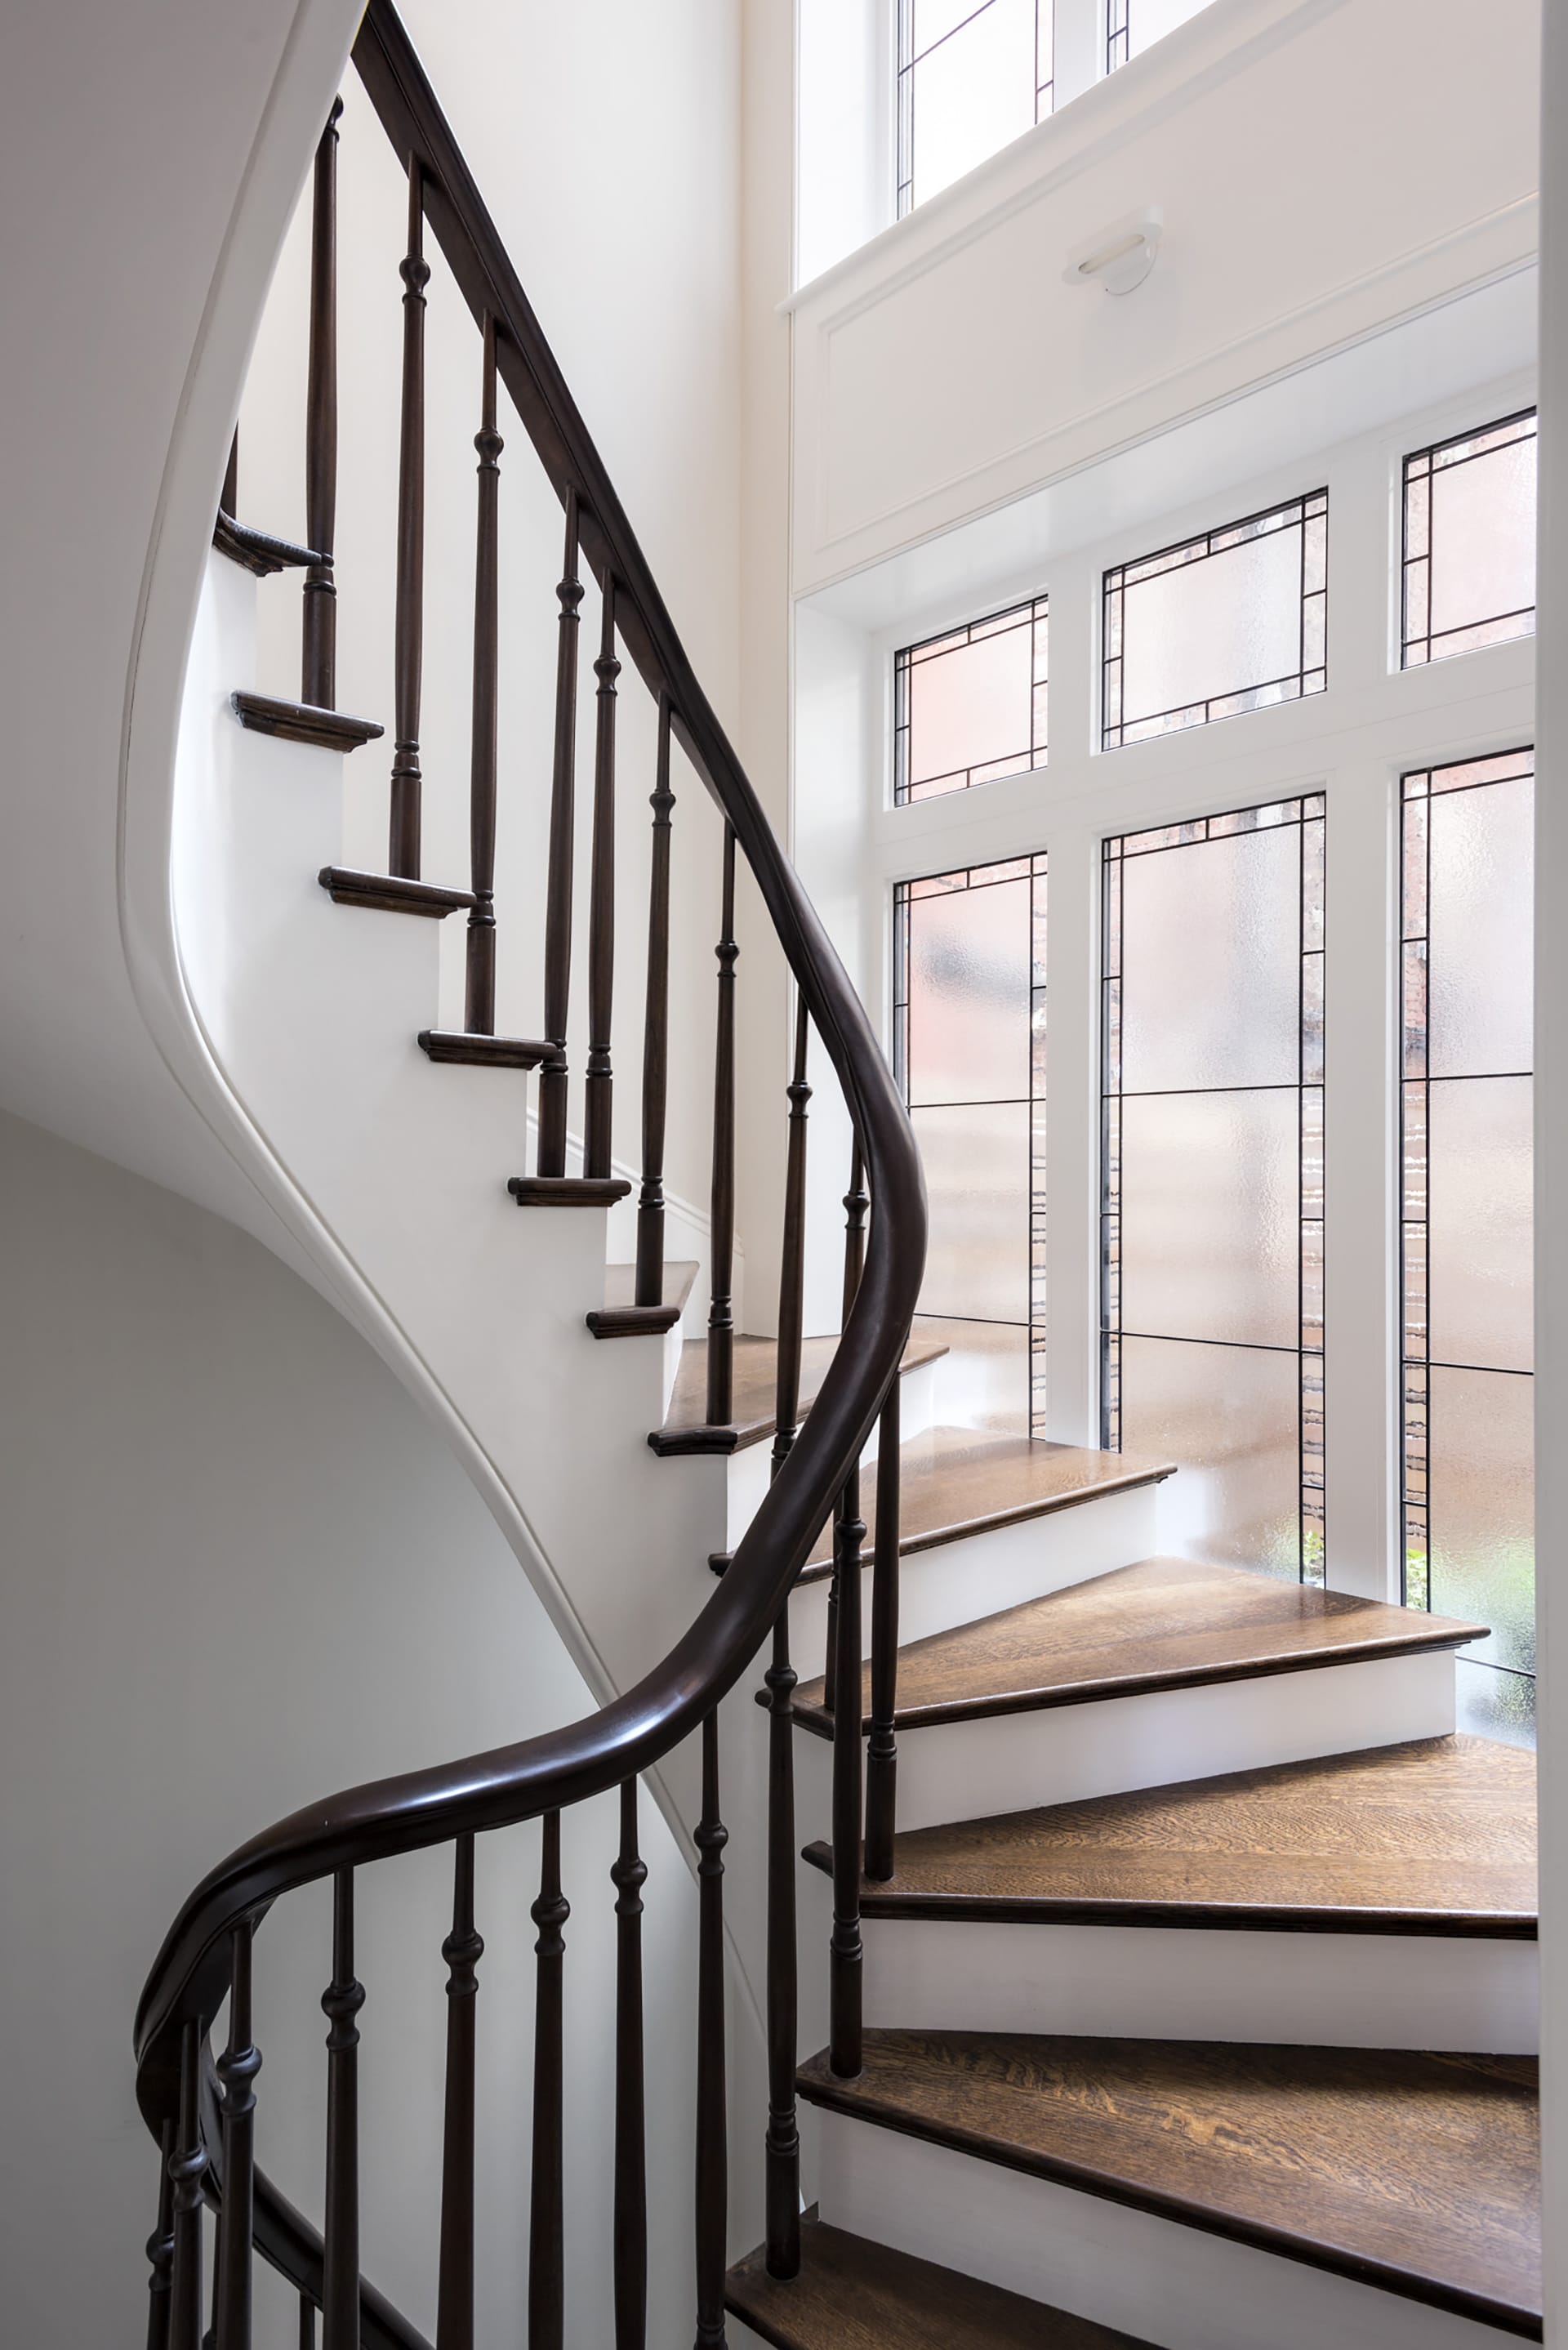 Rear sculptural staircase in an Upper West Side home.